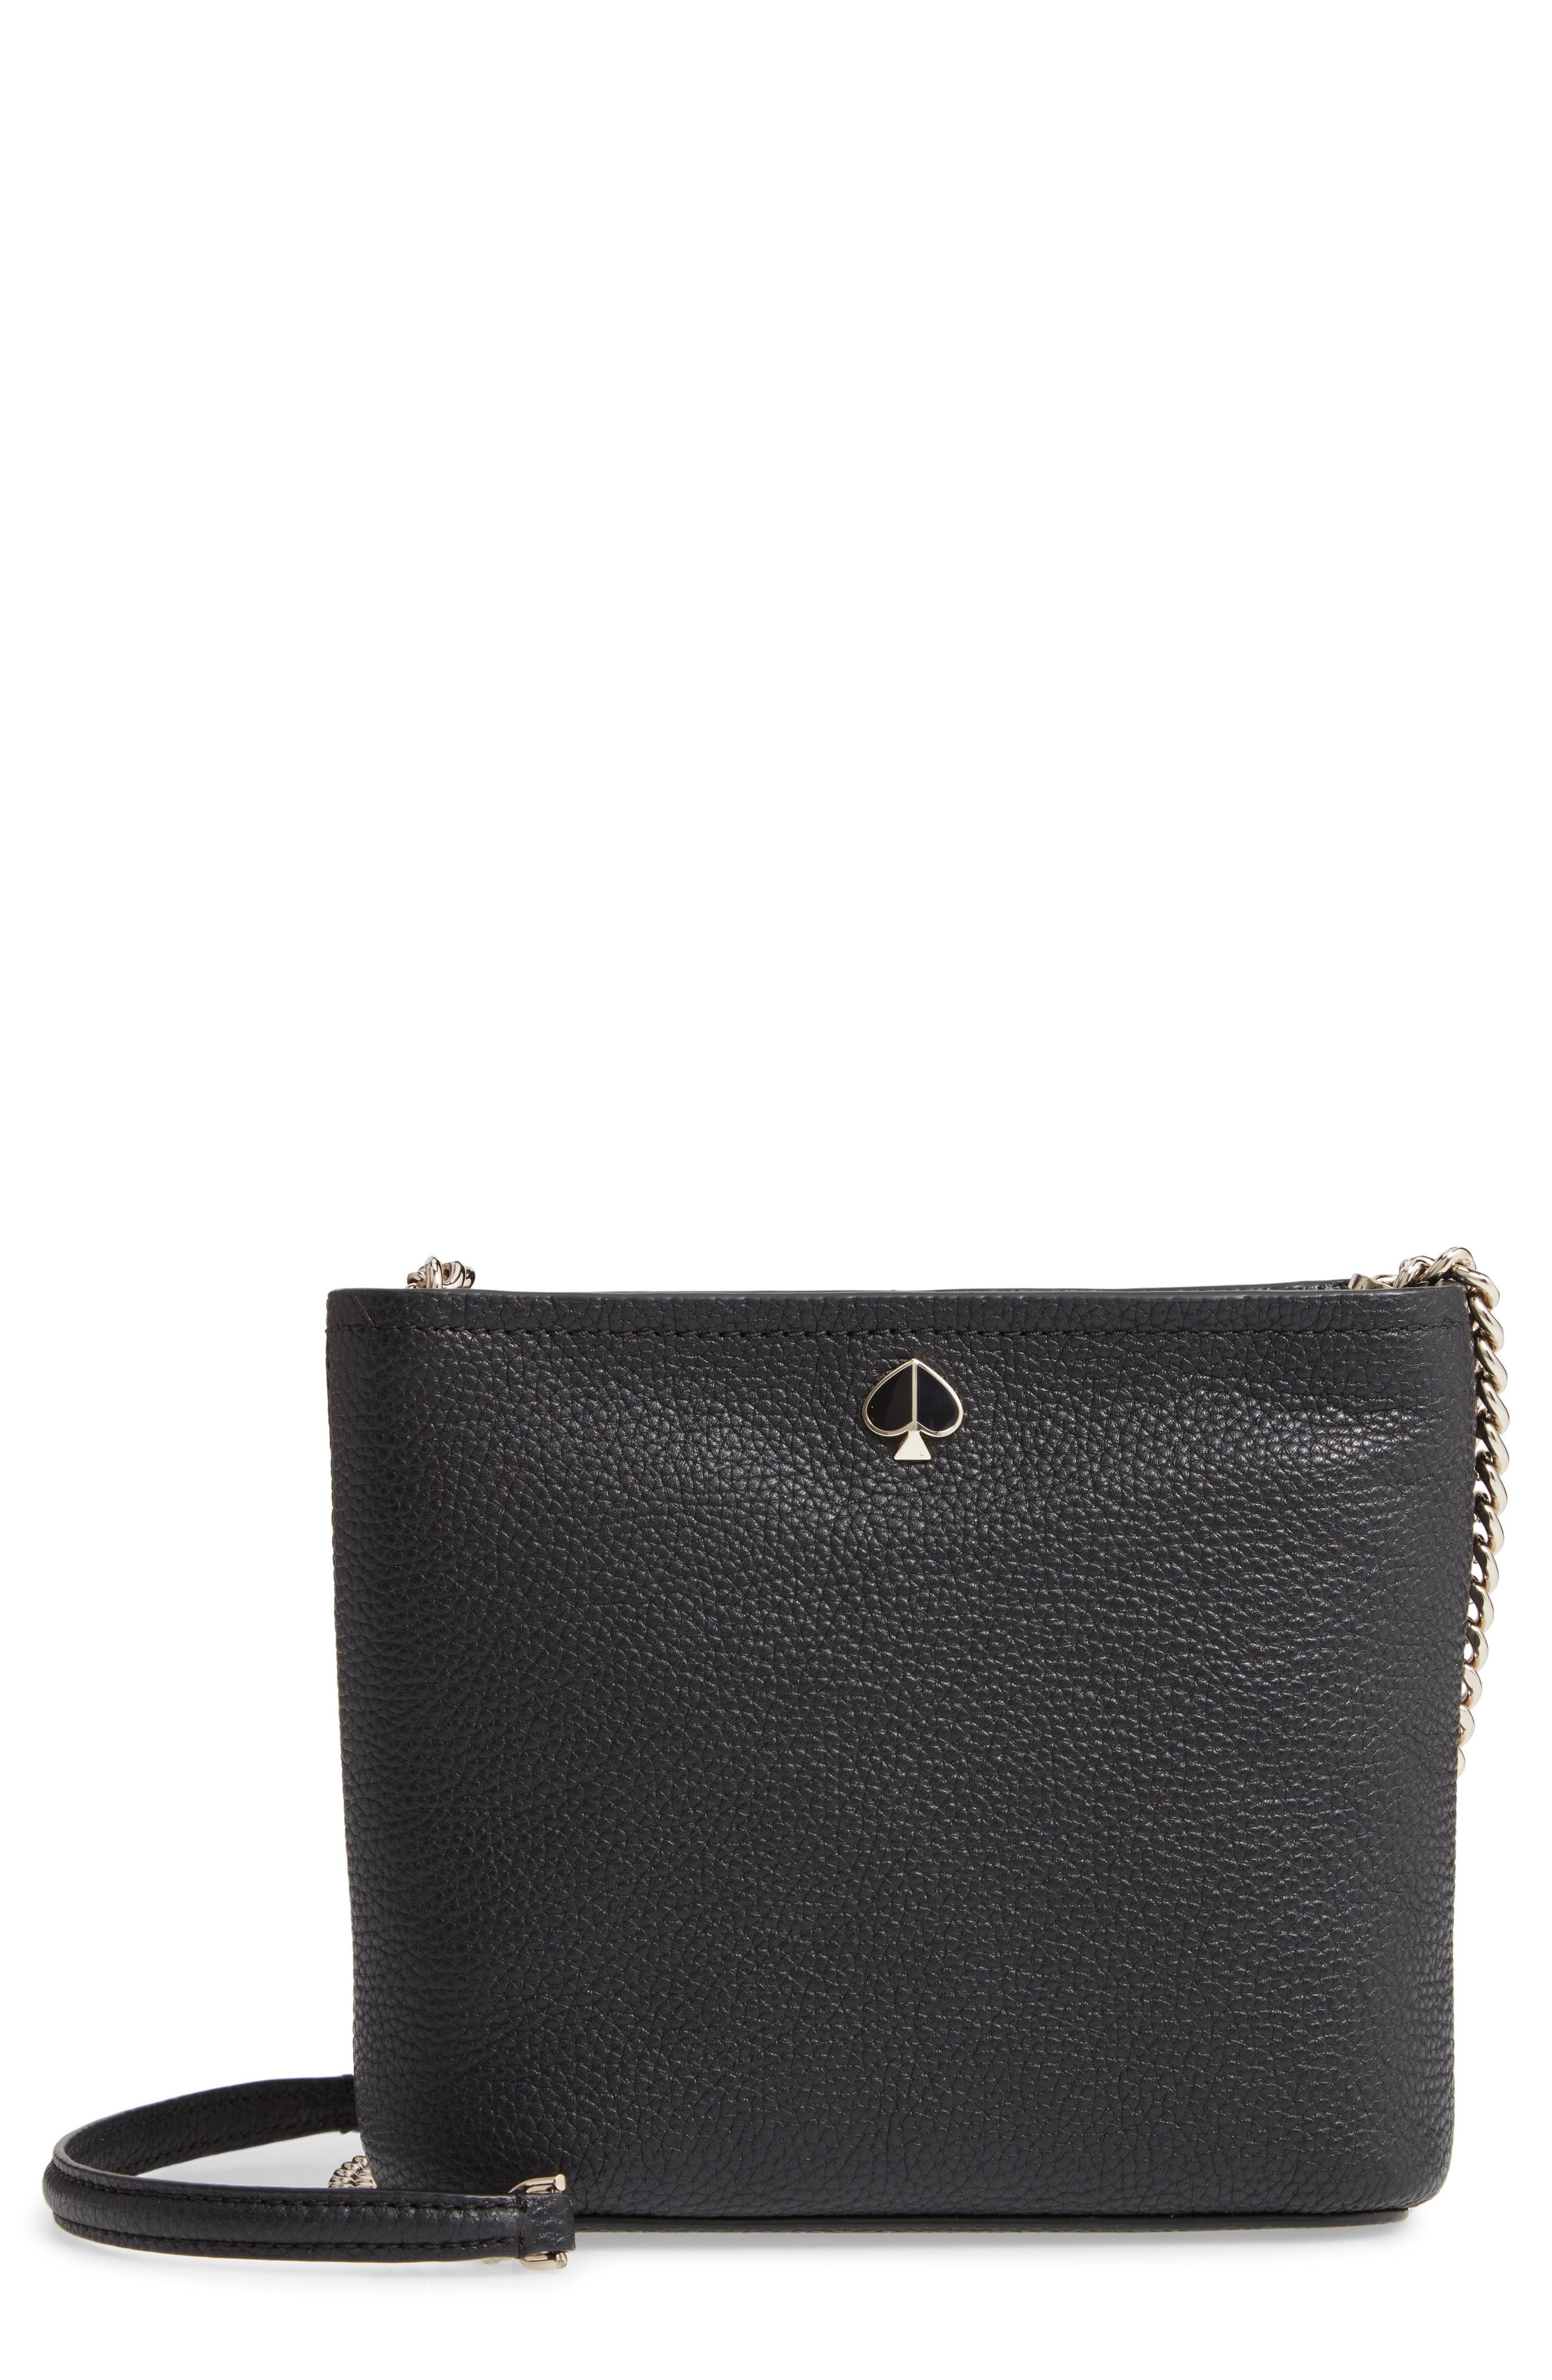 Lyst - Kate Spade Small Polly Leather Crossbody Bag in Black